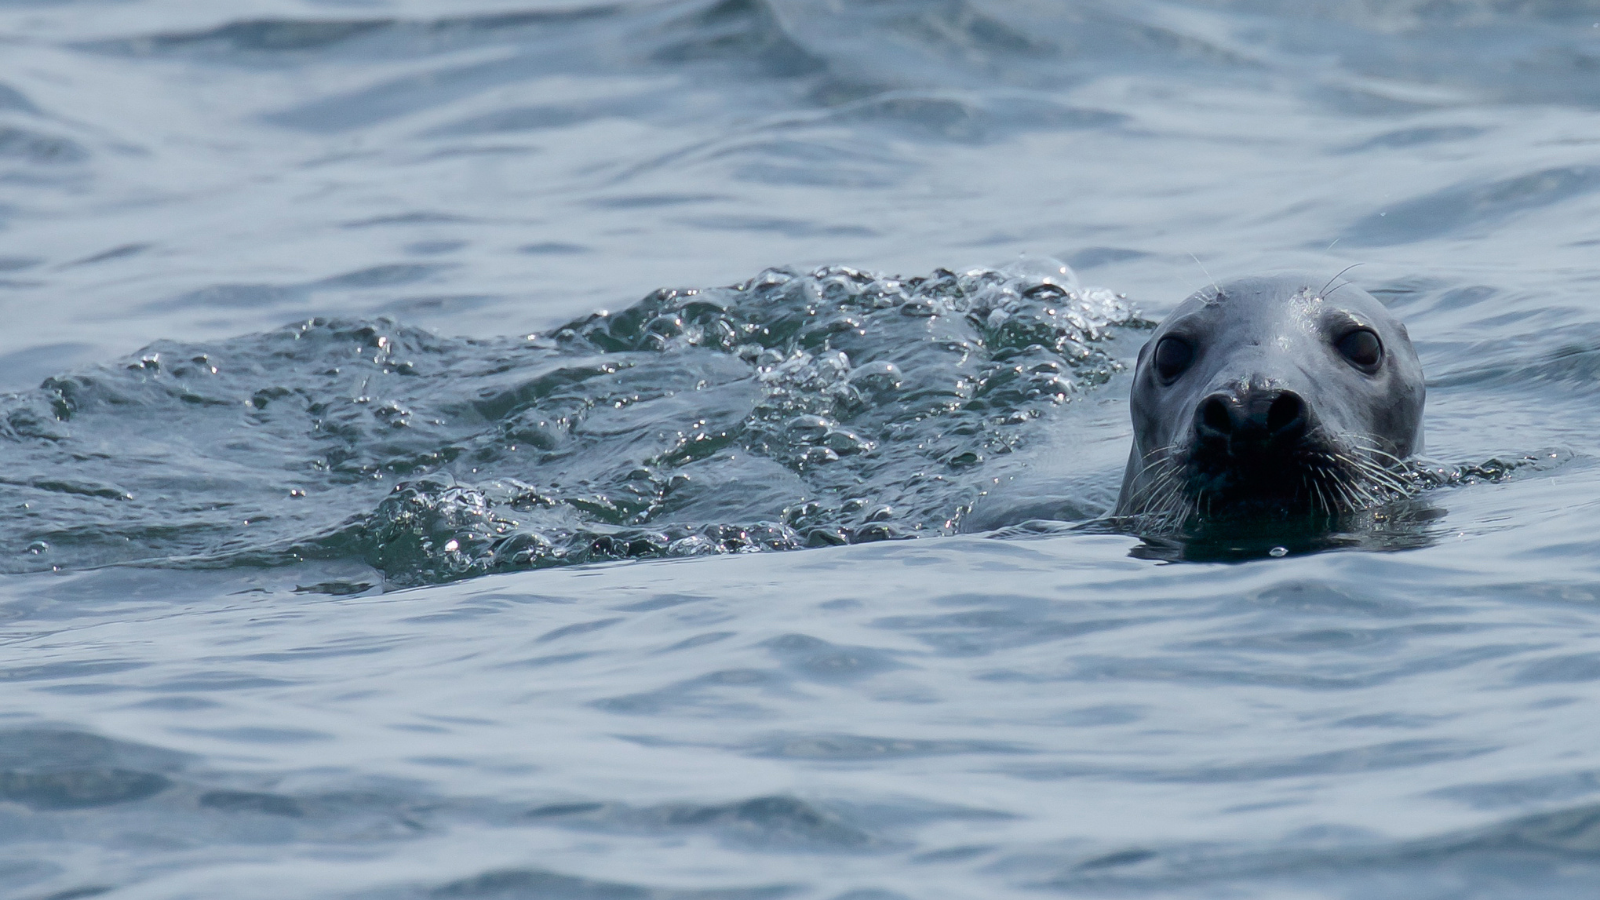 Grey seal head poking out of the grey, swelly ocean in Ireland